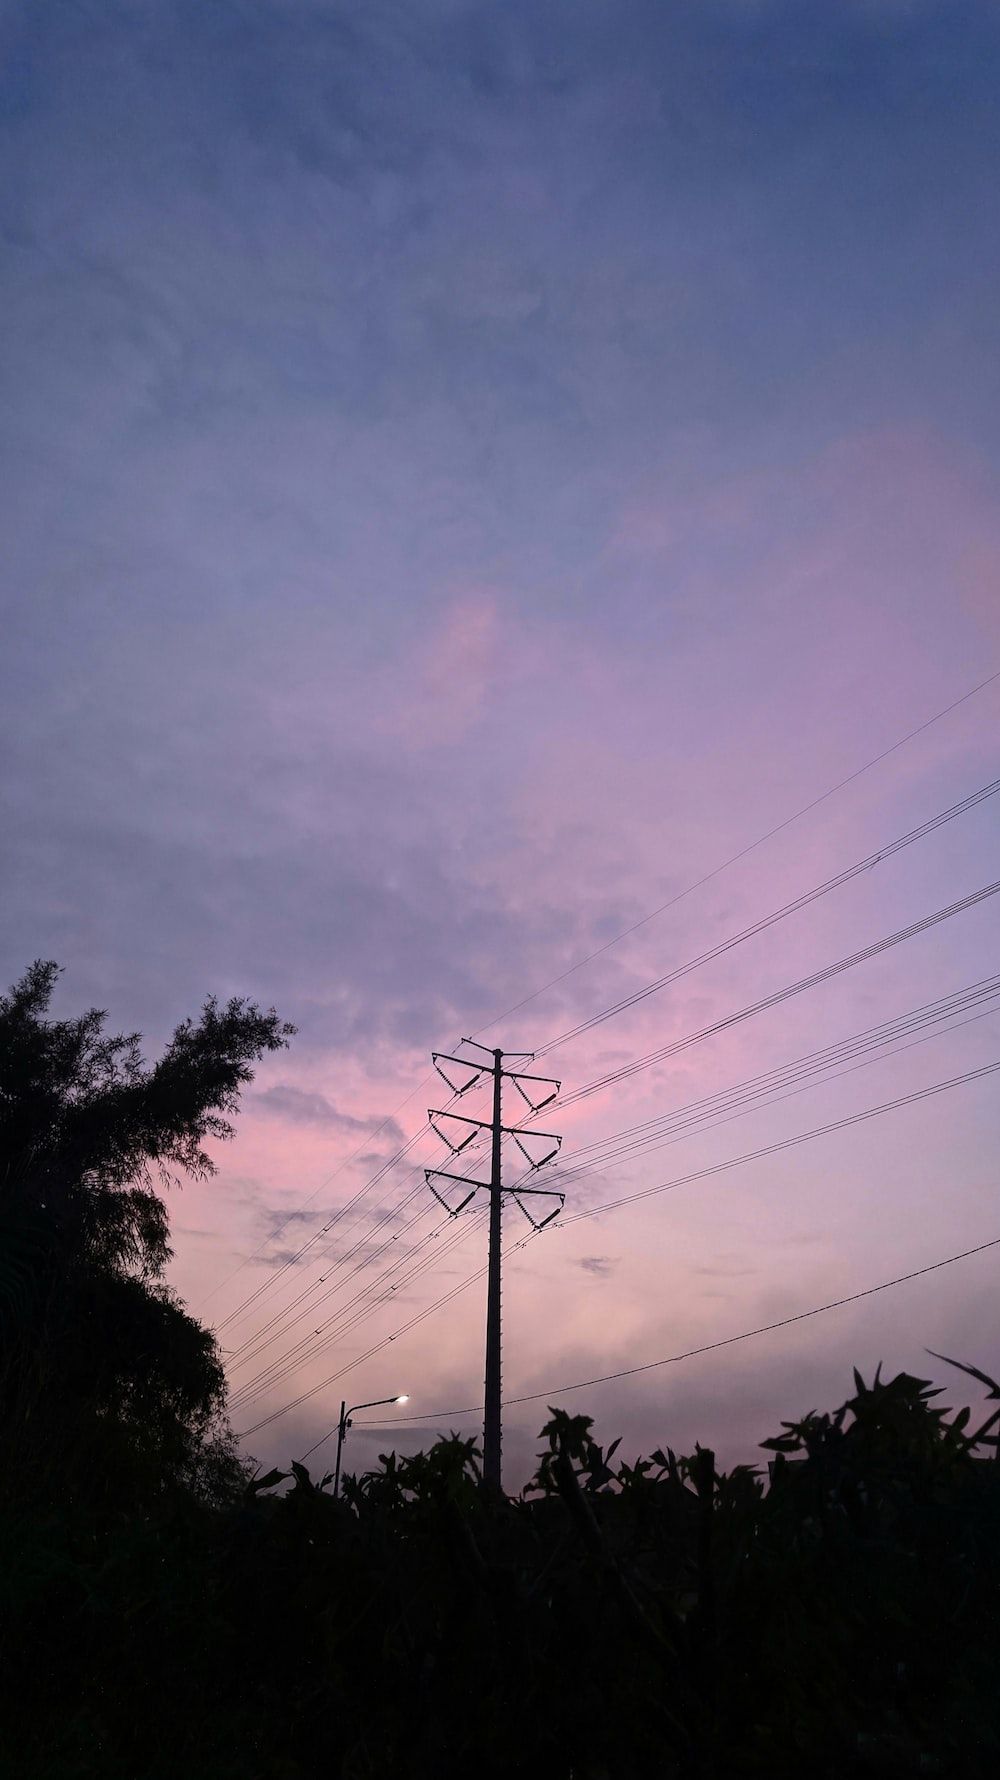 A telephone pole with power lines in front of a pink and blue sky - Sunrise